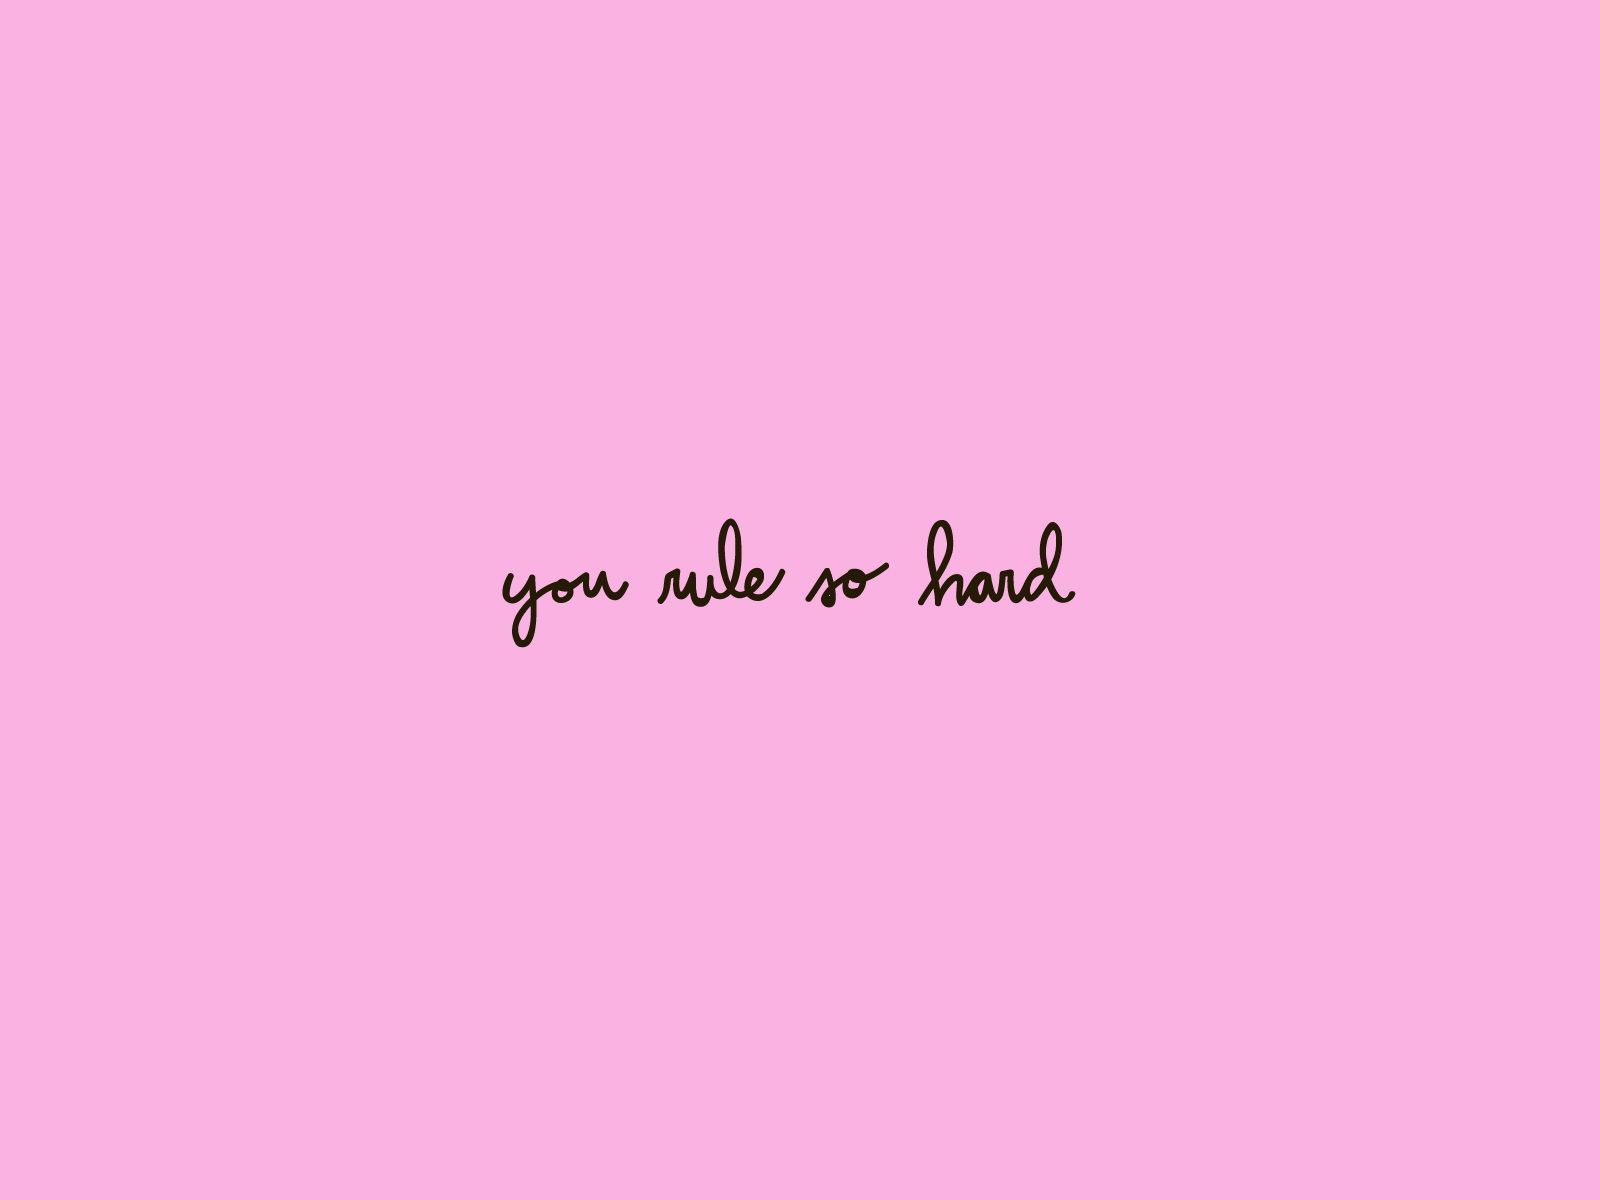 A pink background with the words 